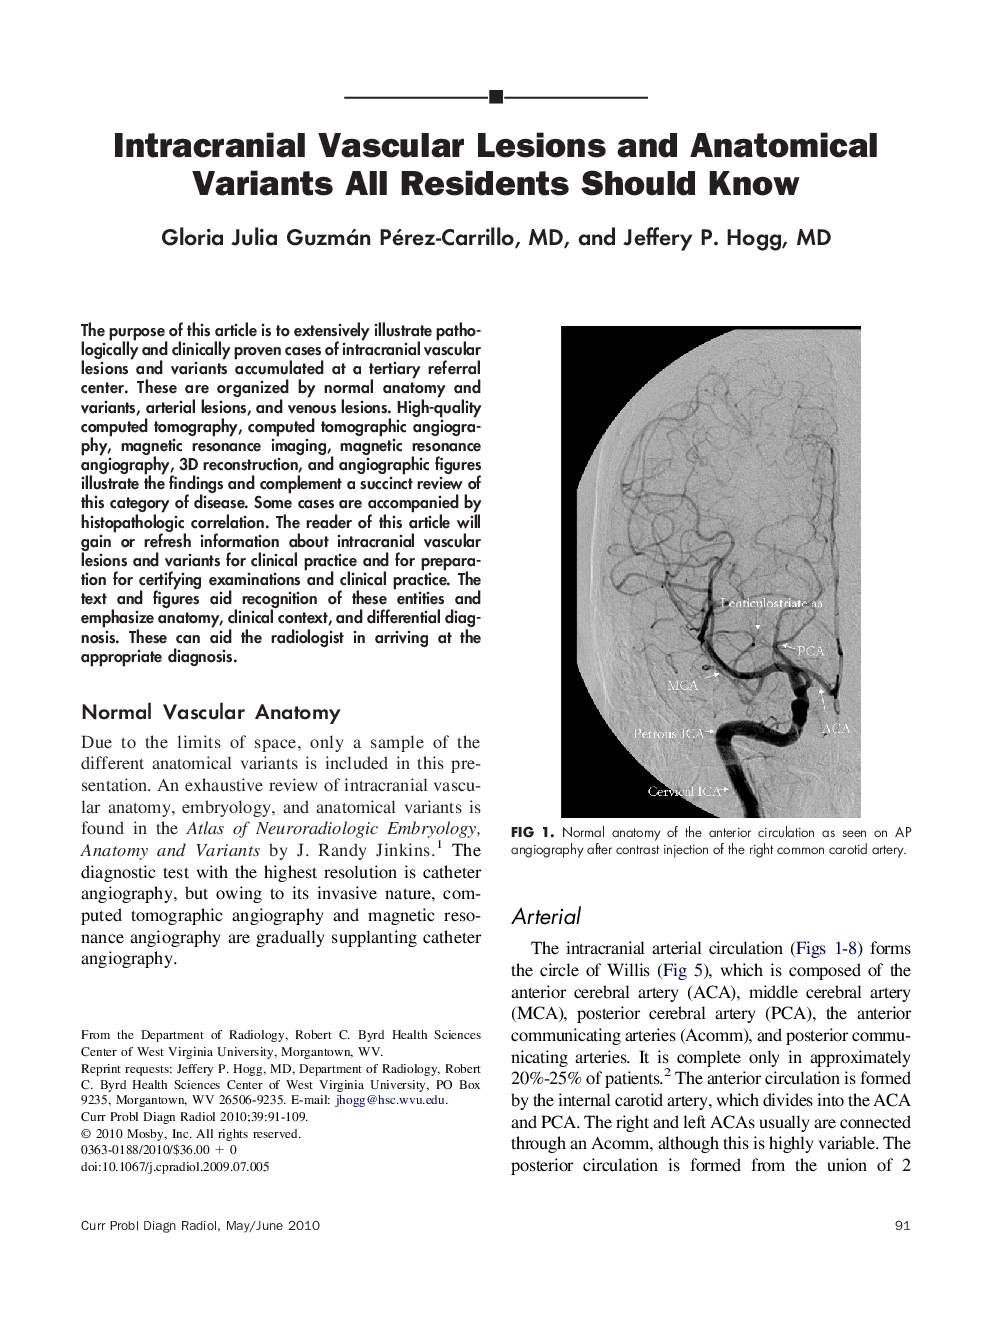 Intracranial Vascular Lesions and Anatomical Variants All Residents Should Know